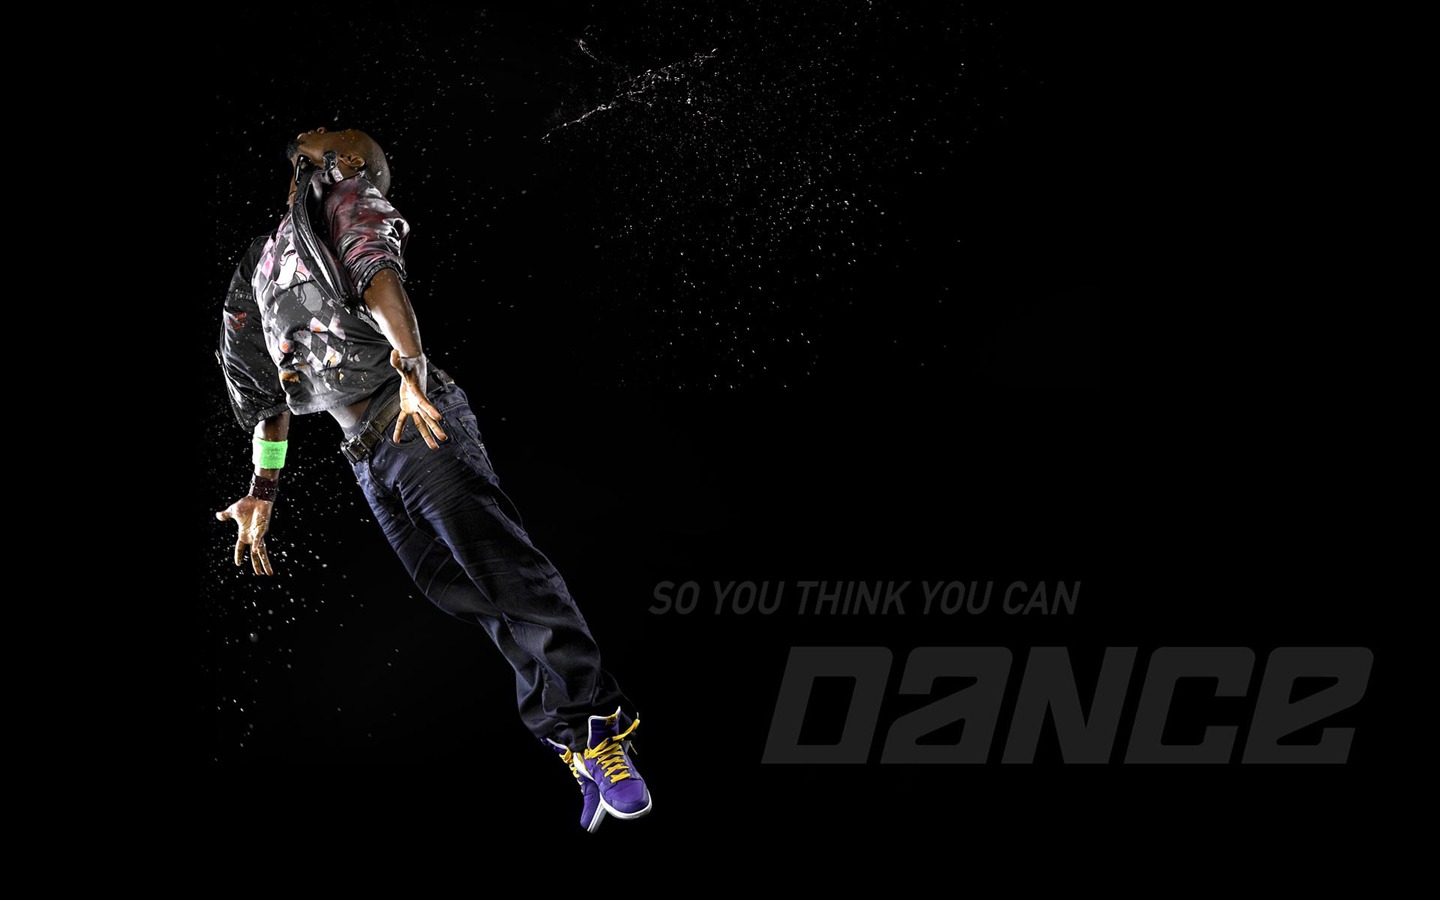 So You Think You Can Dance 舞林争霸 壁纸(一)10 - 1440x900